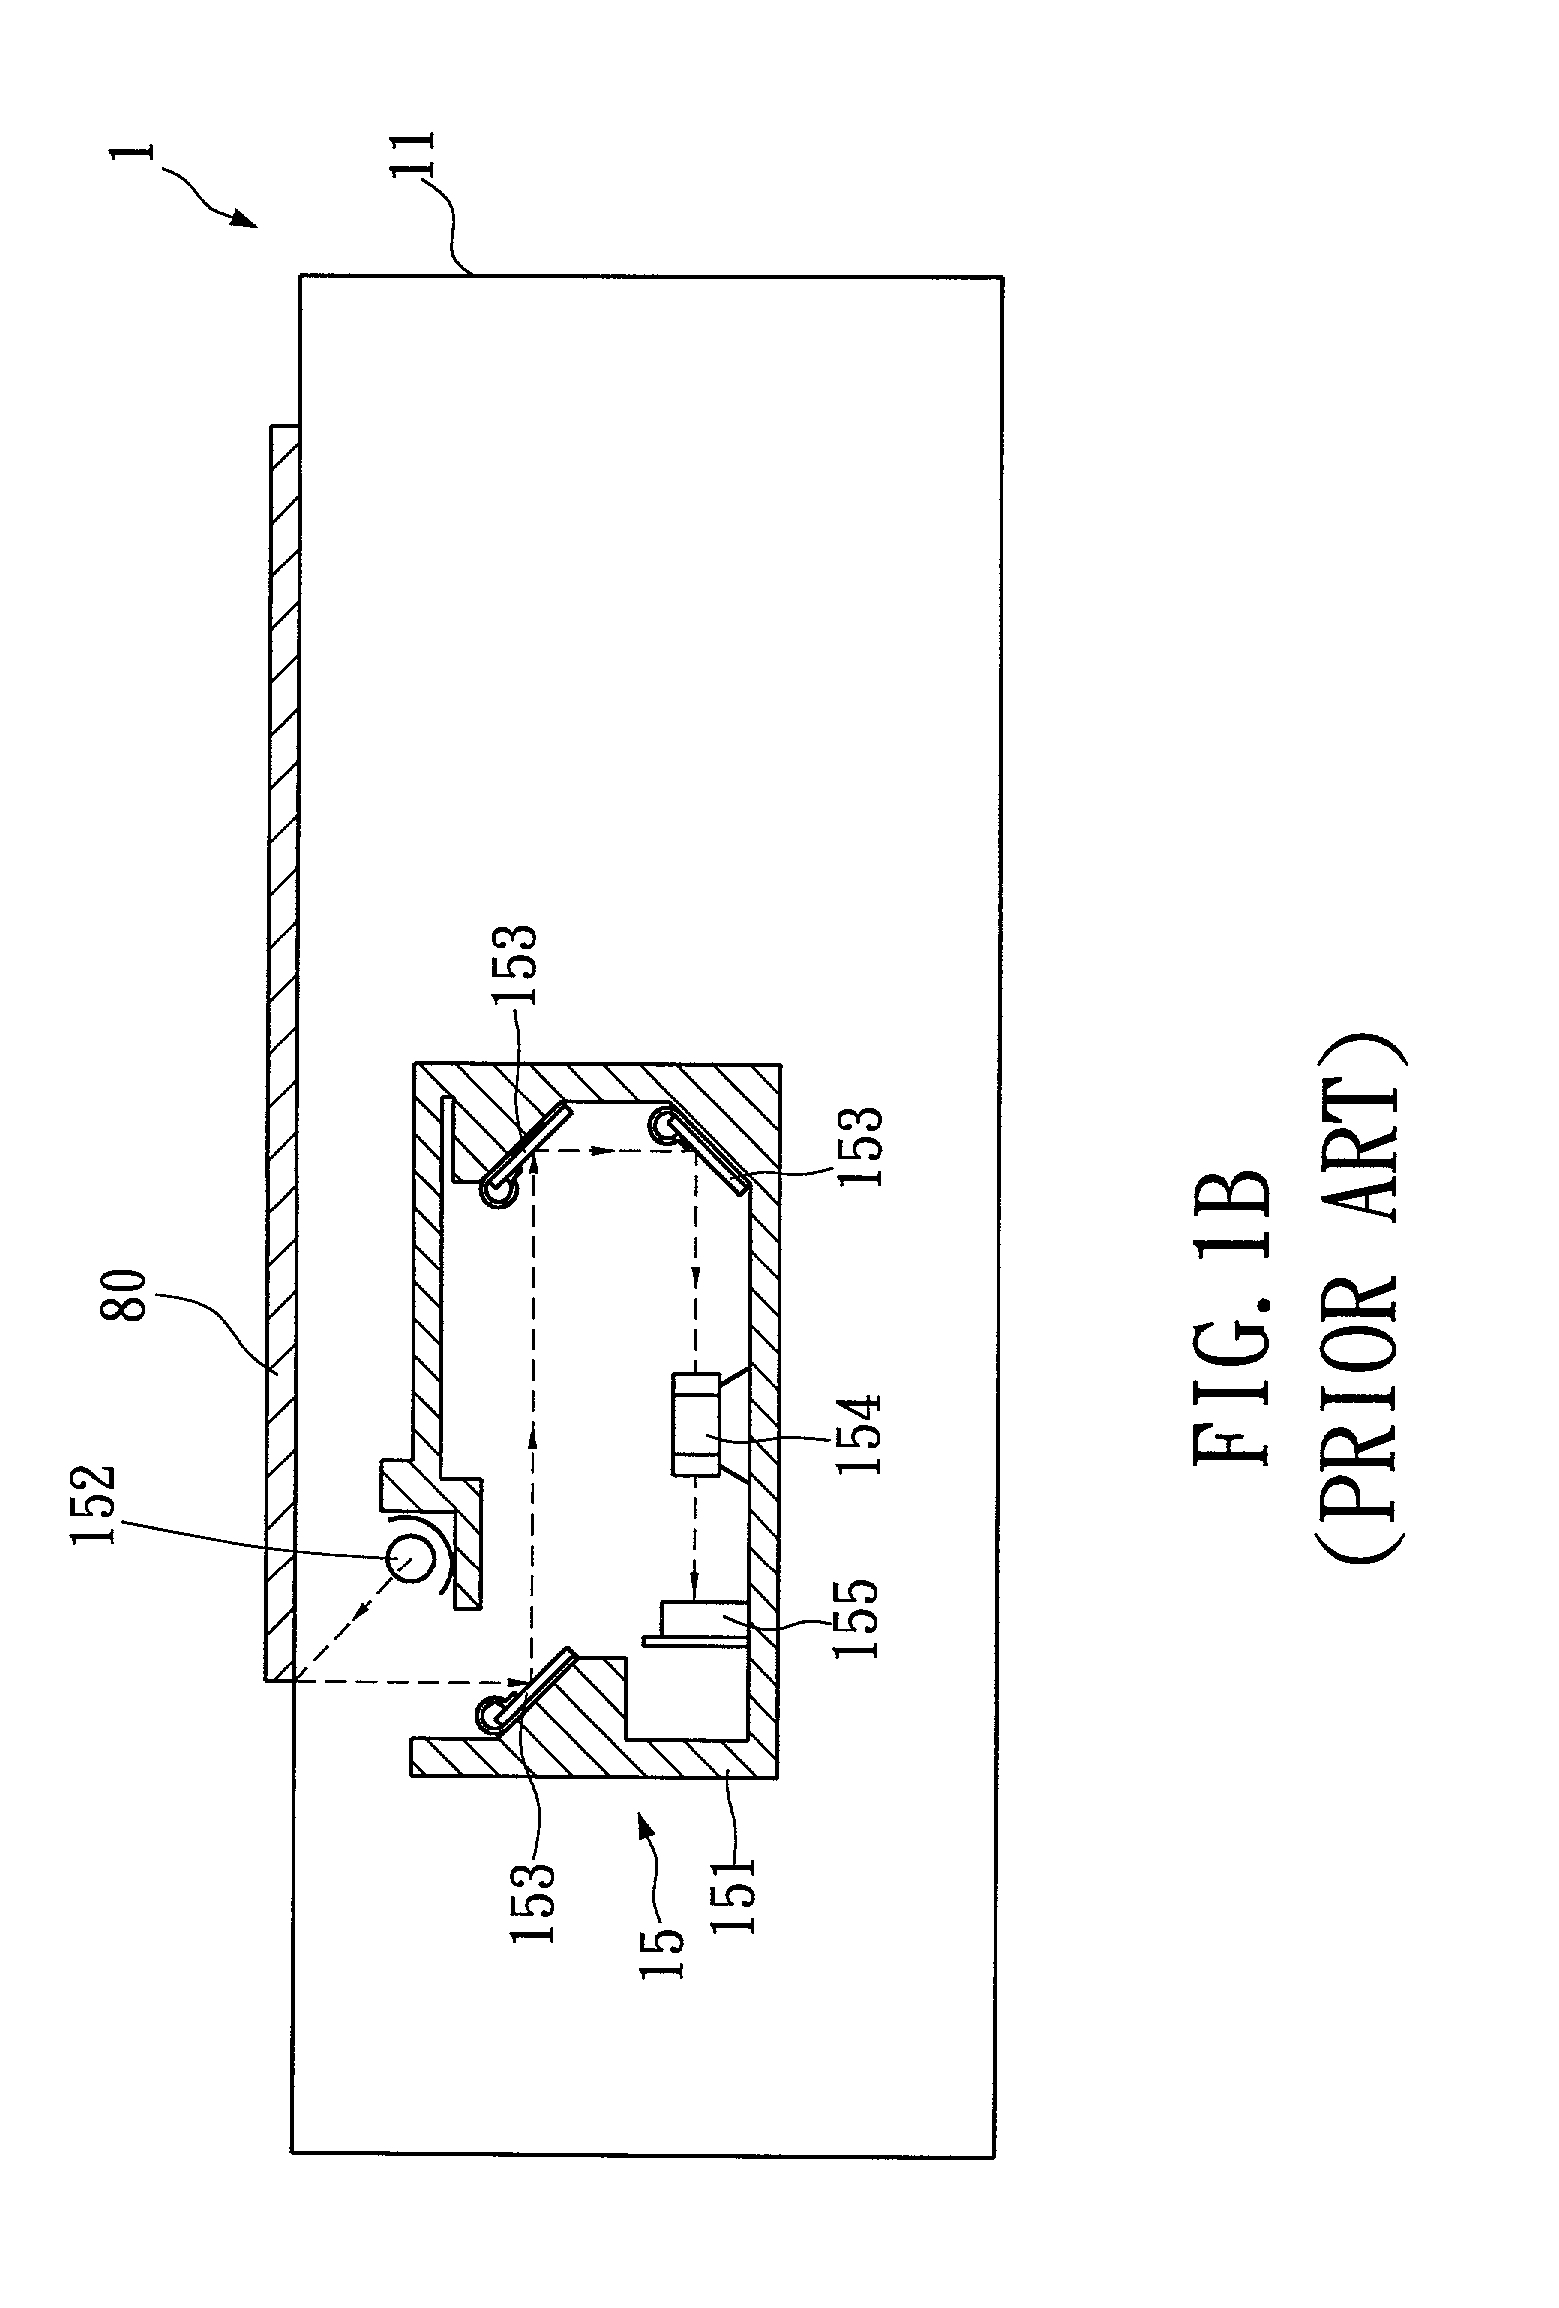 Depth of field adjustment device and method for an automatic document feeder